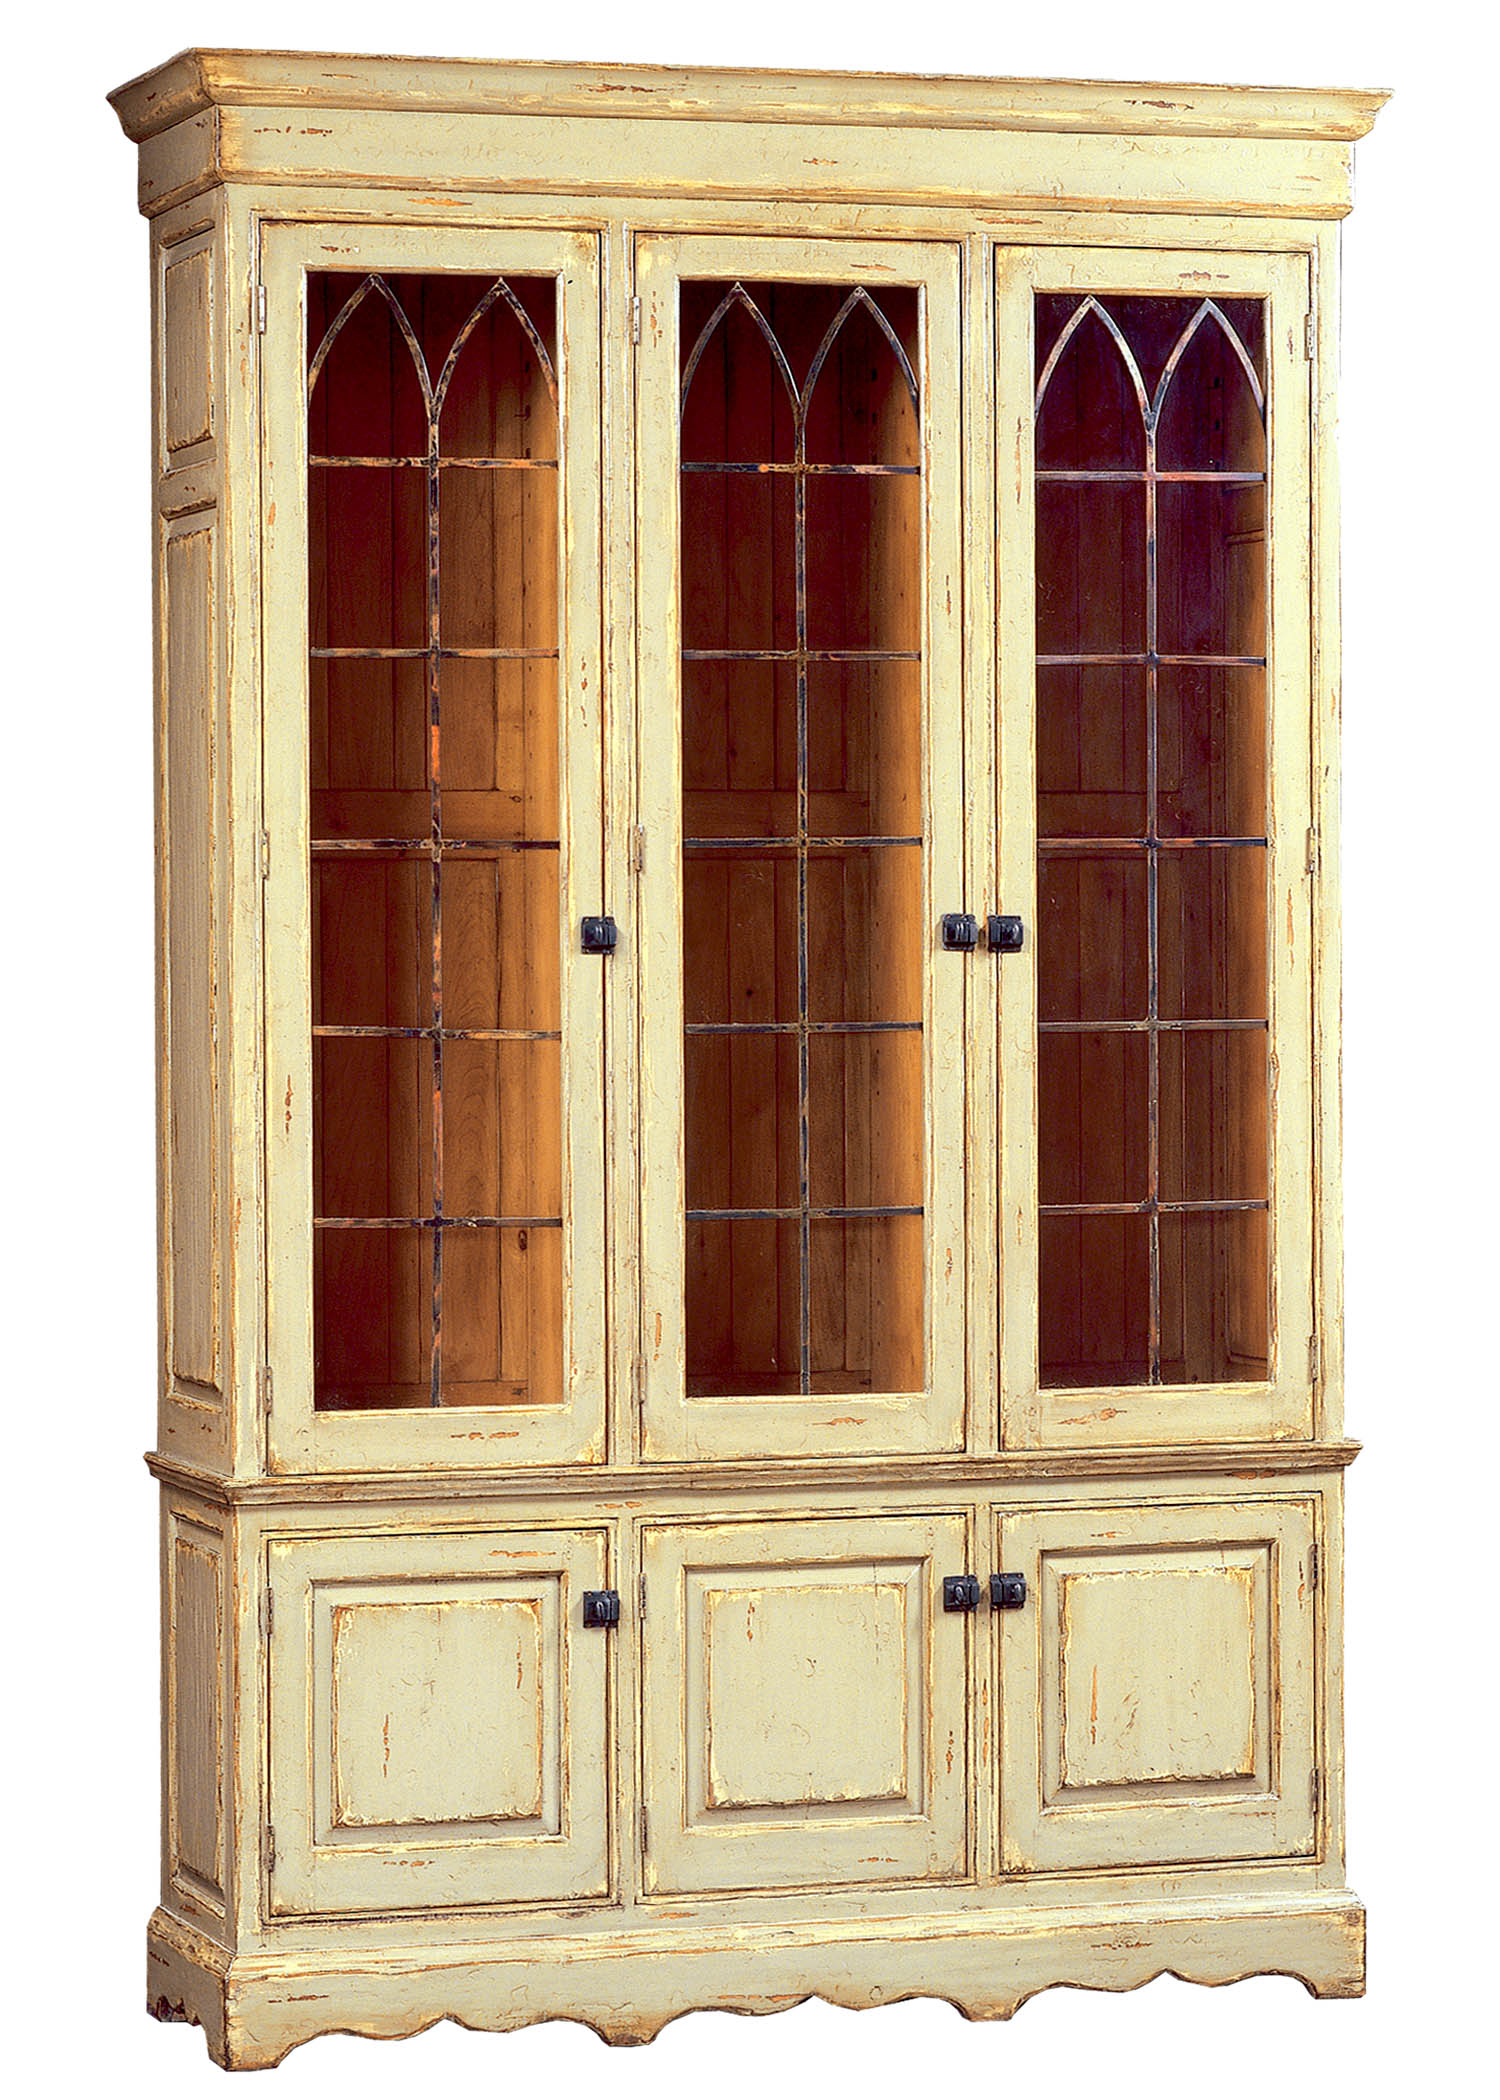 Evehsam traditional farmhouse country hutch storage display cabinet with gothic arch detail by Woodland furniture in Idaho Falls